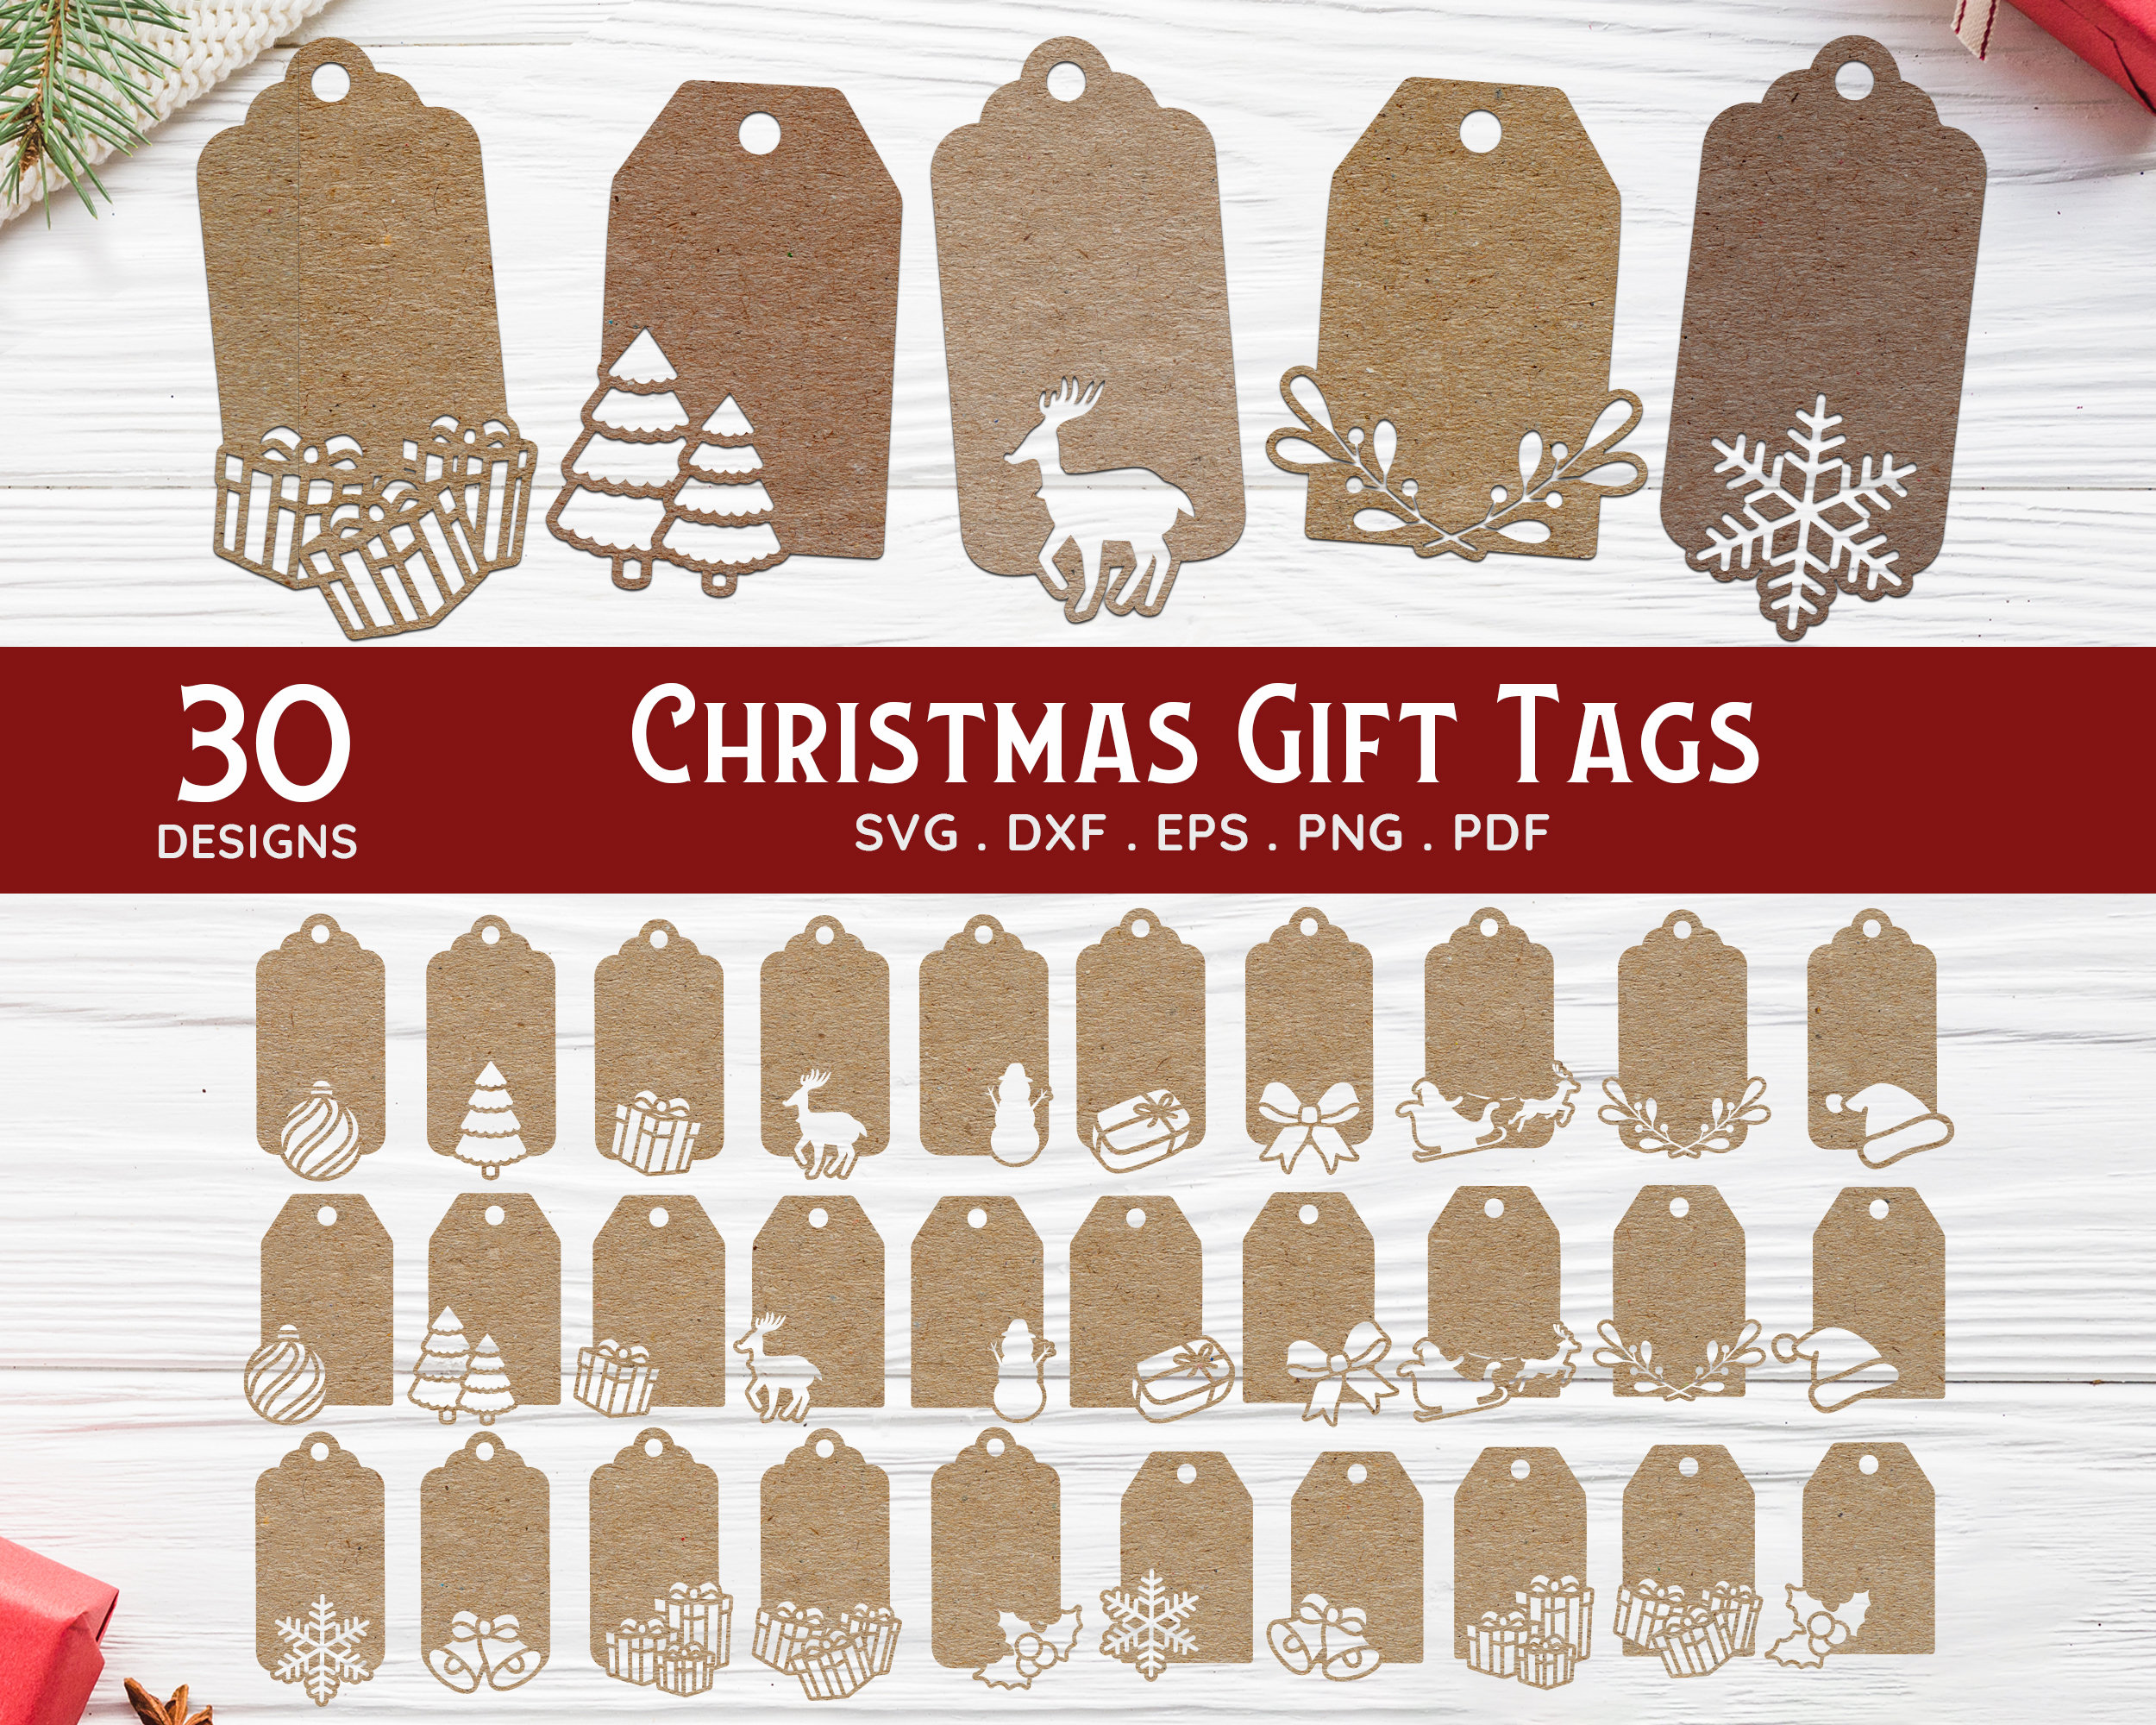 Printable Gift Tag, Multipurpose Tags, Favor Tags, to and From